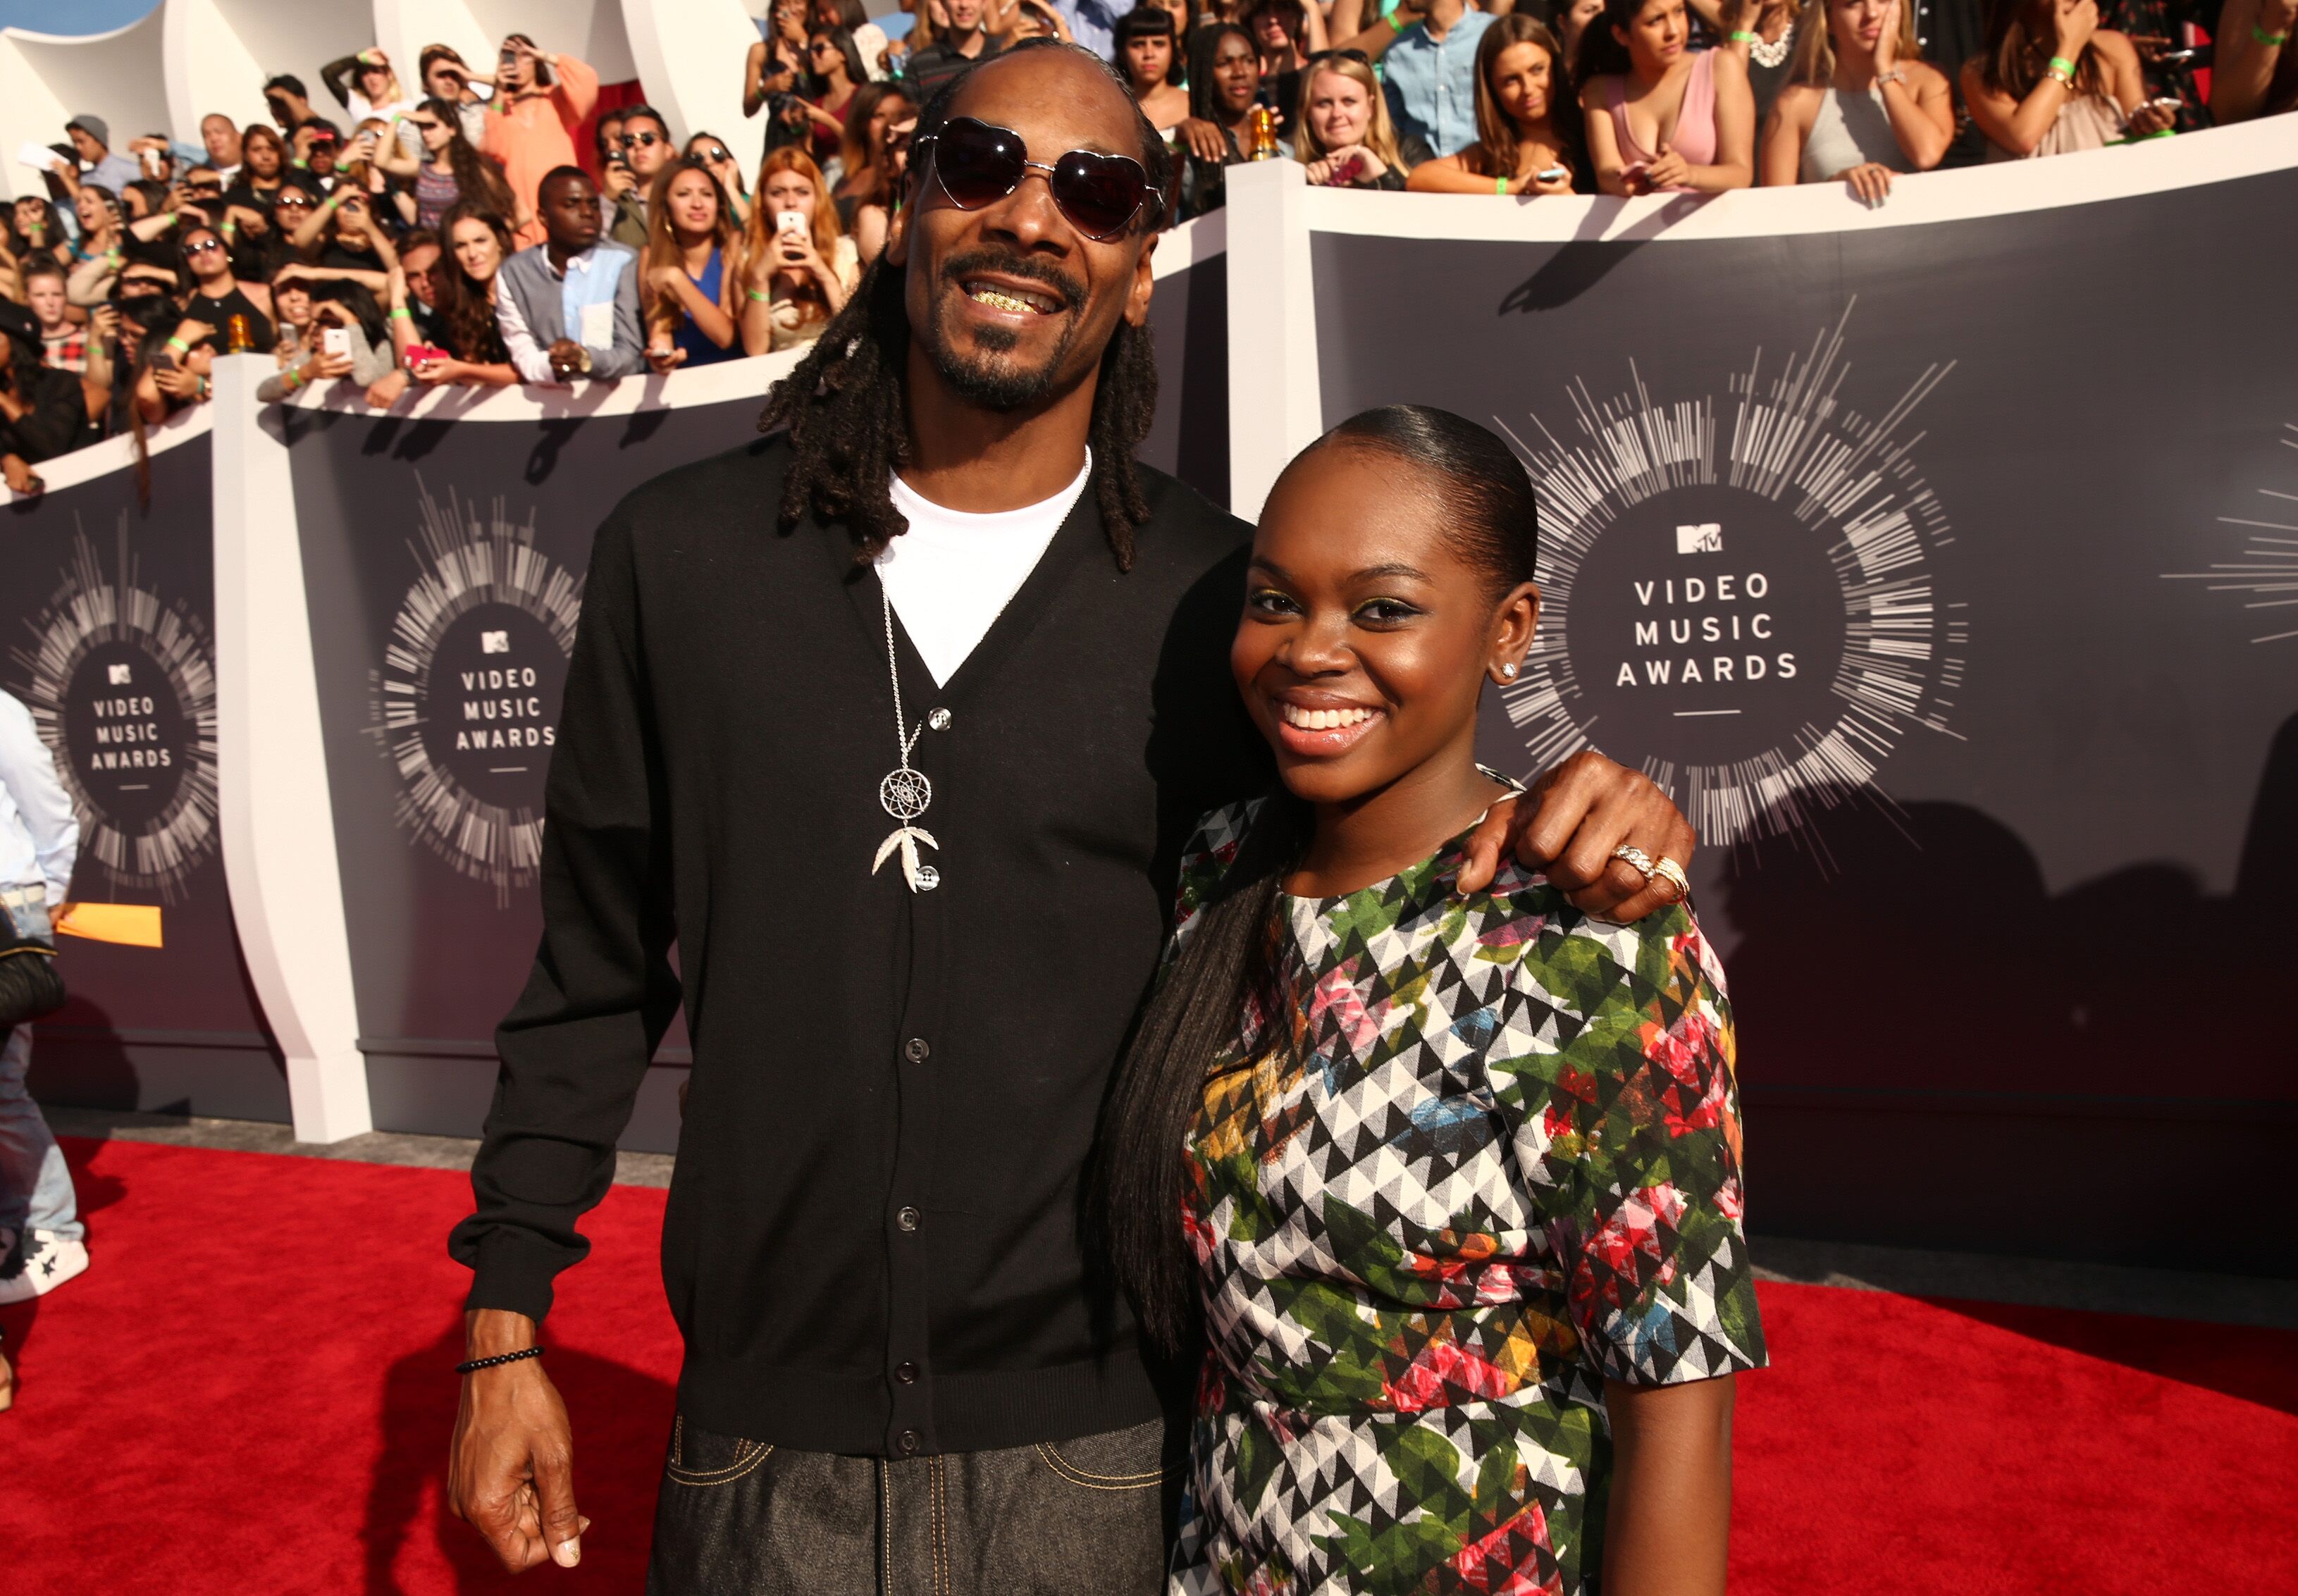 Snoop Dogg and daughter Cori Broadus at the Video Music Awards in 2014 | Photo: Getty Images